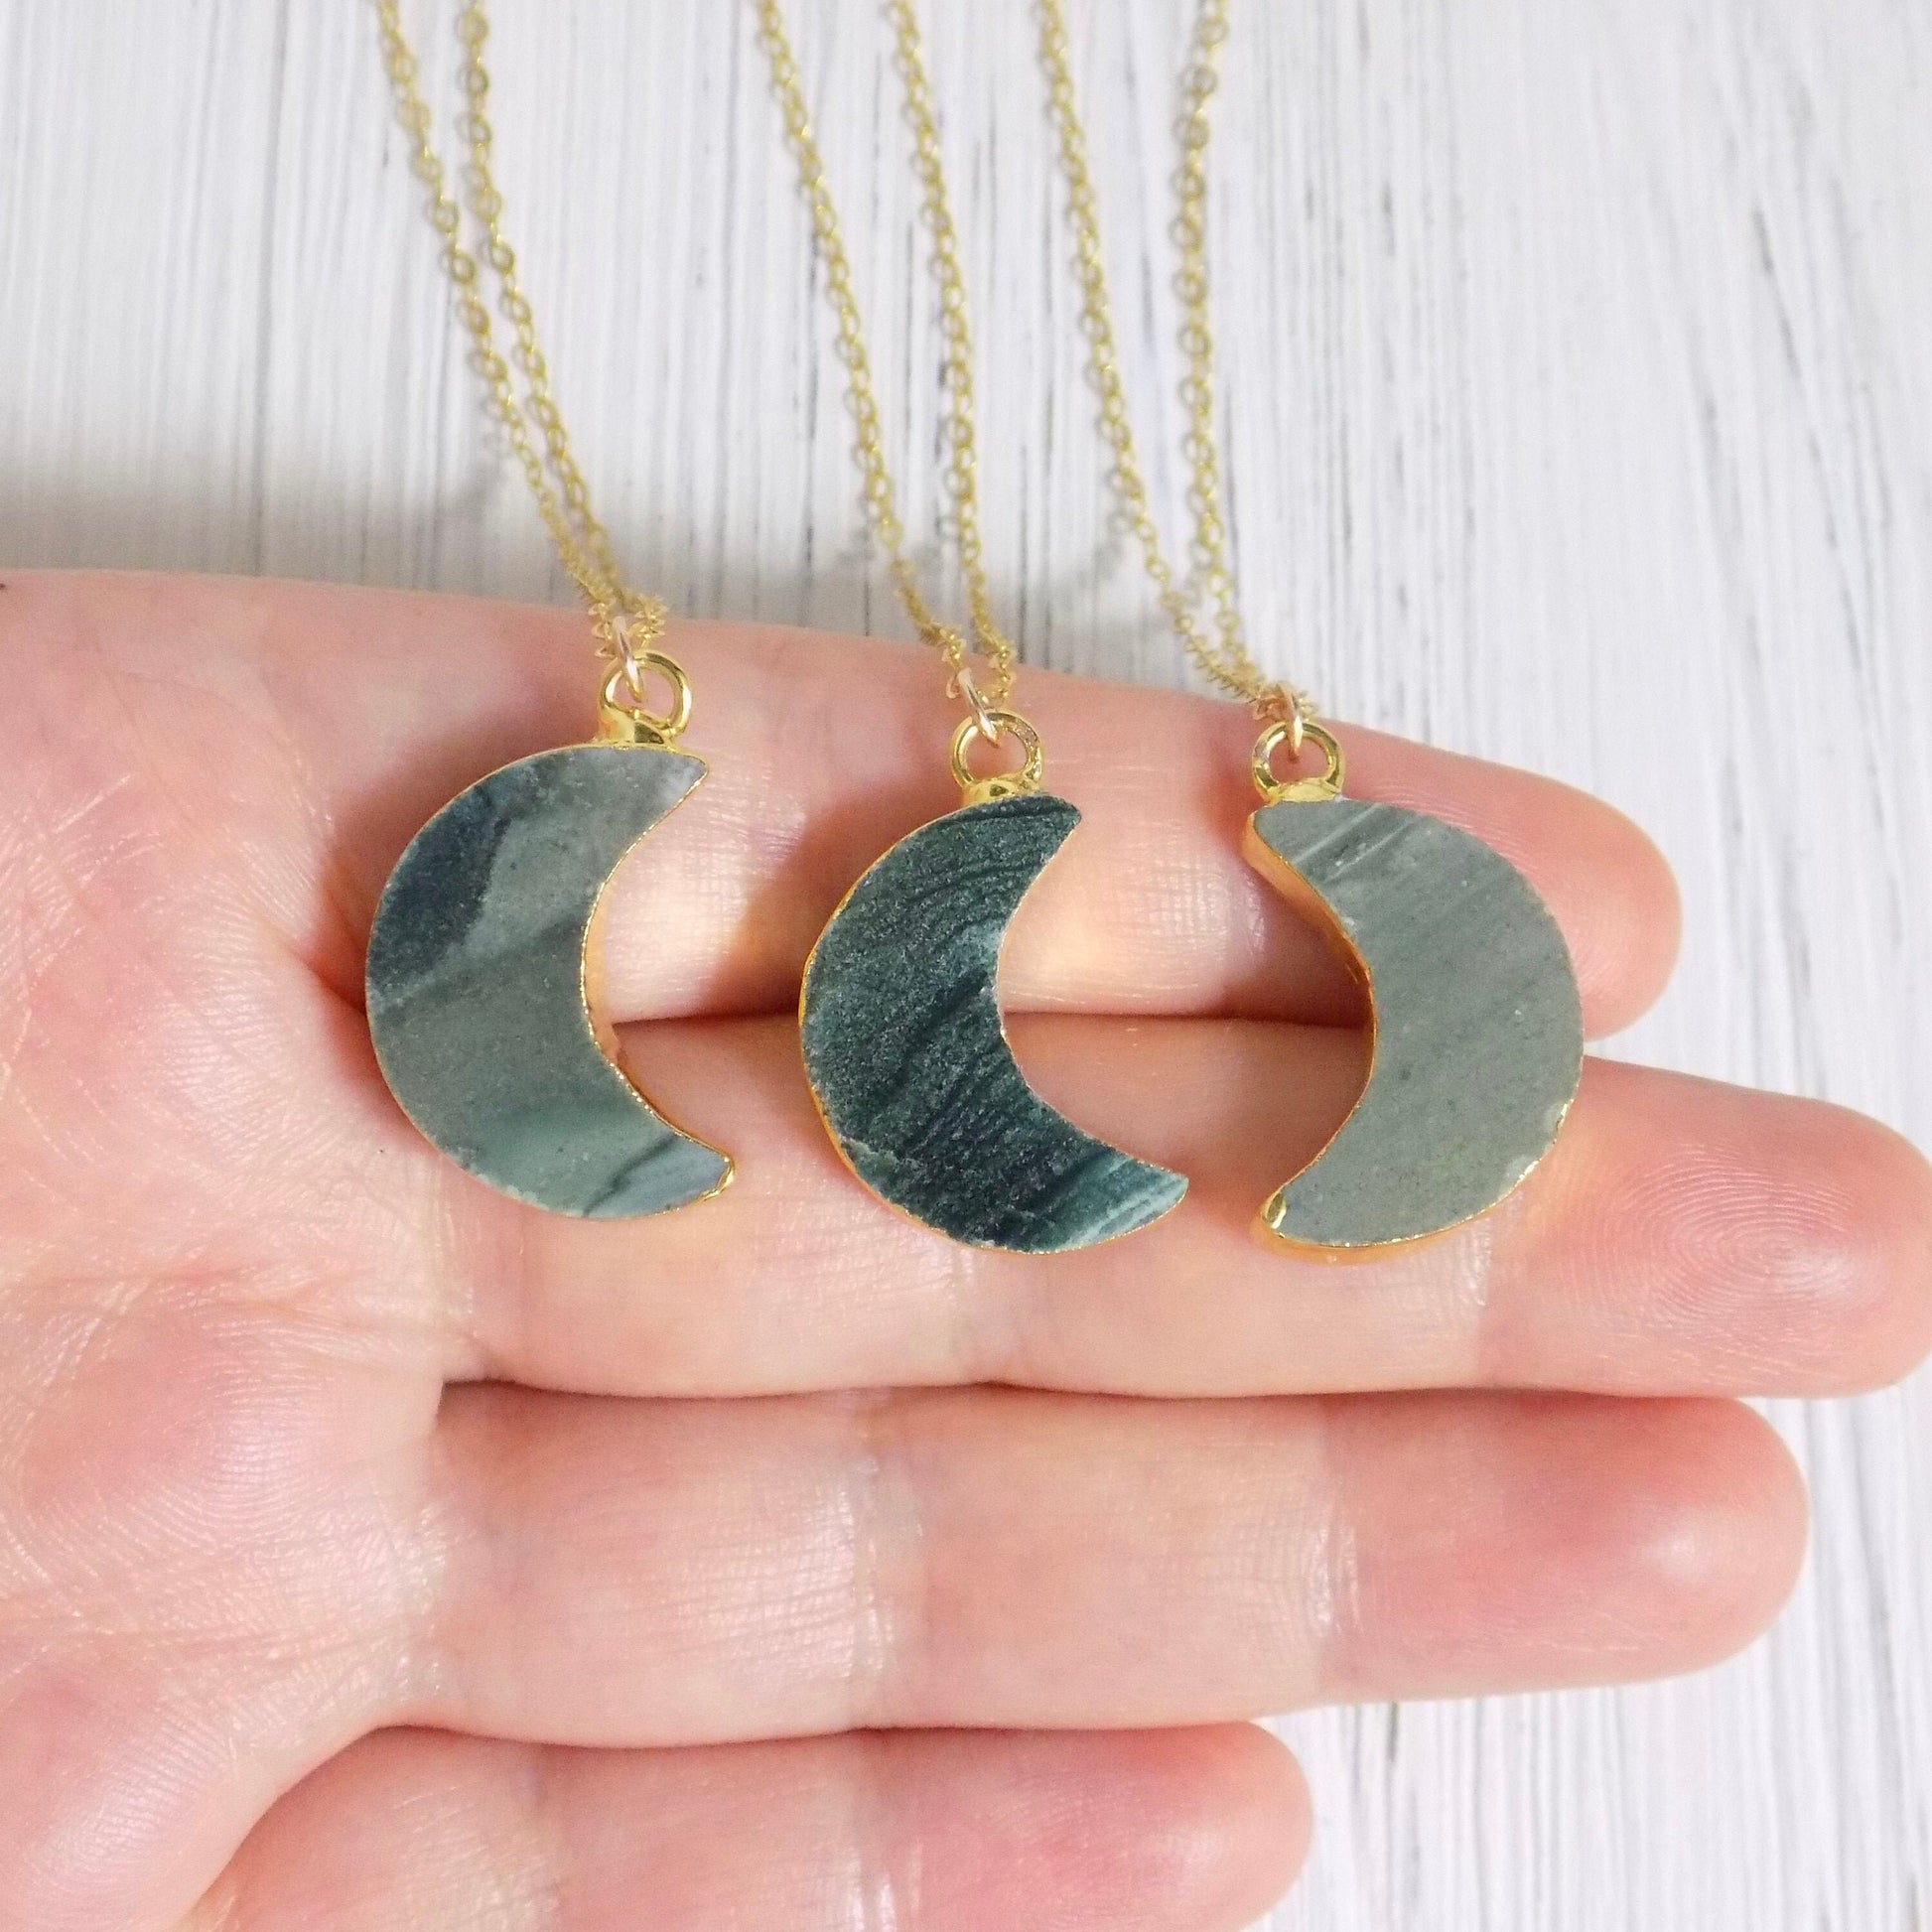 Crescent Moon Necklace - Jasper Necklace Gold Dipped